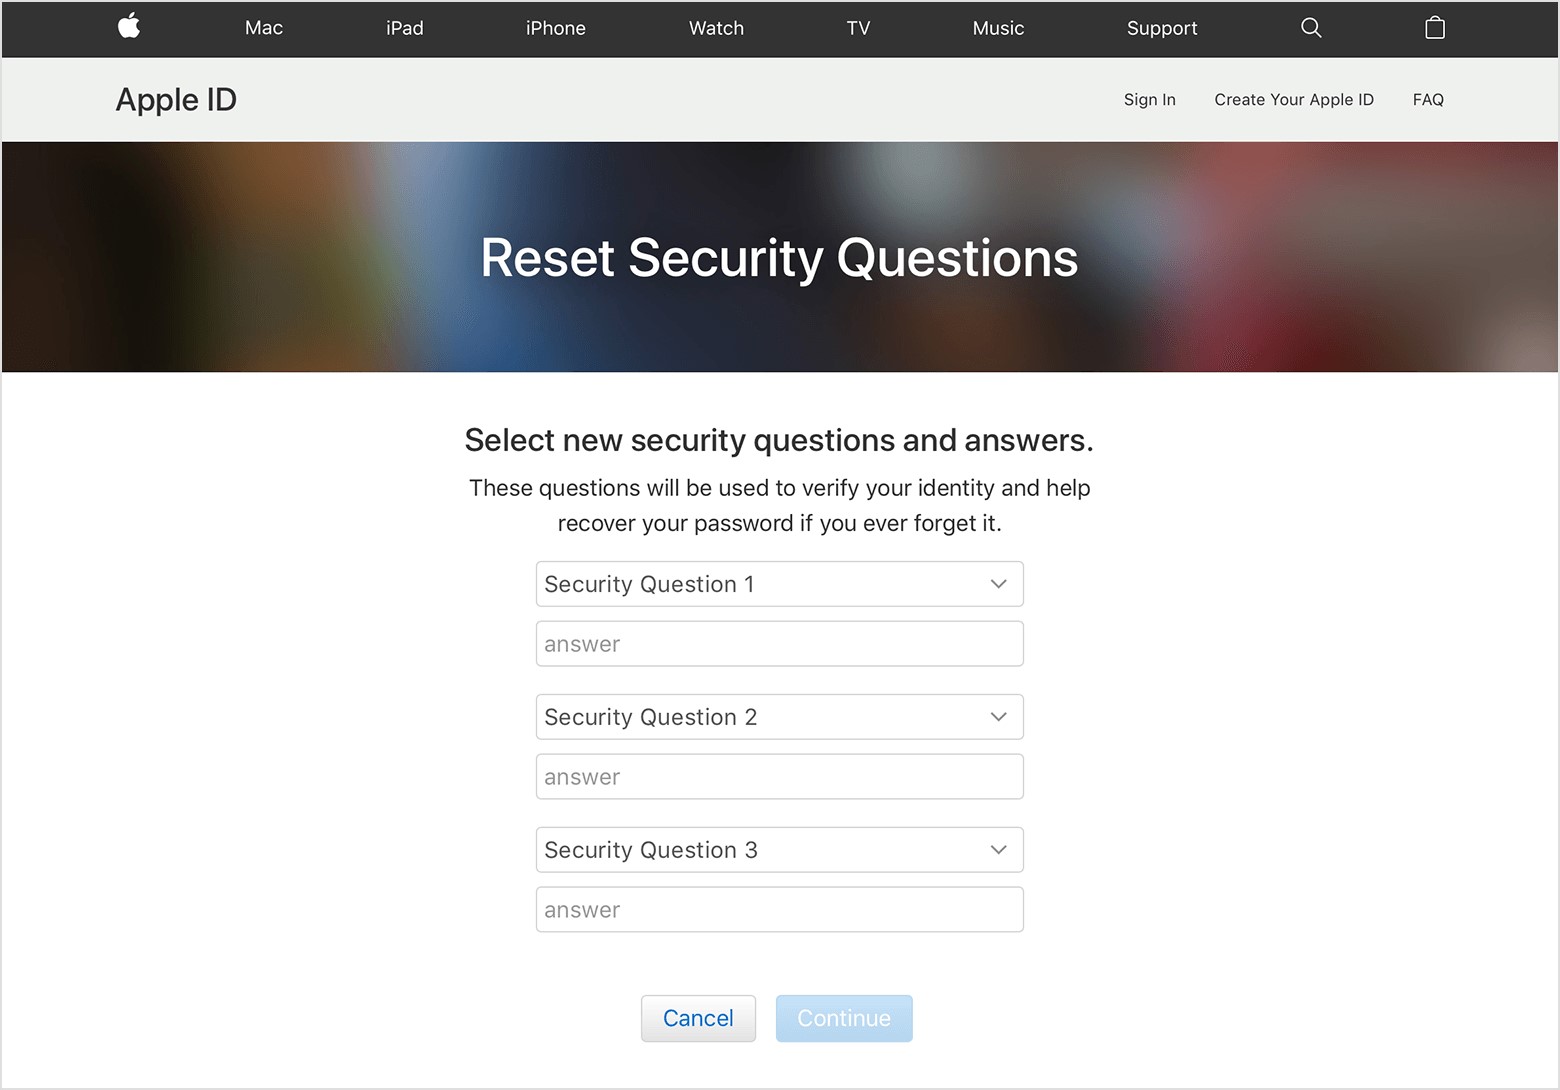 How do I recover my password through security questions? 